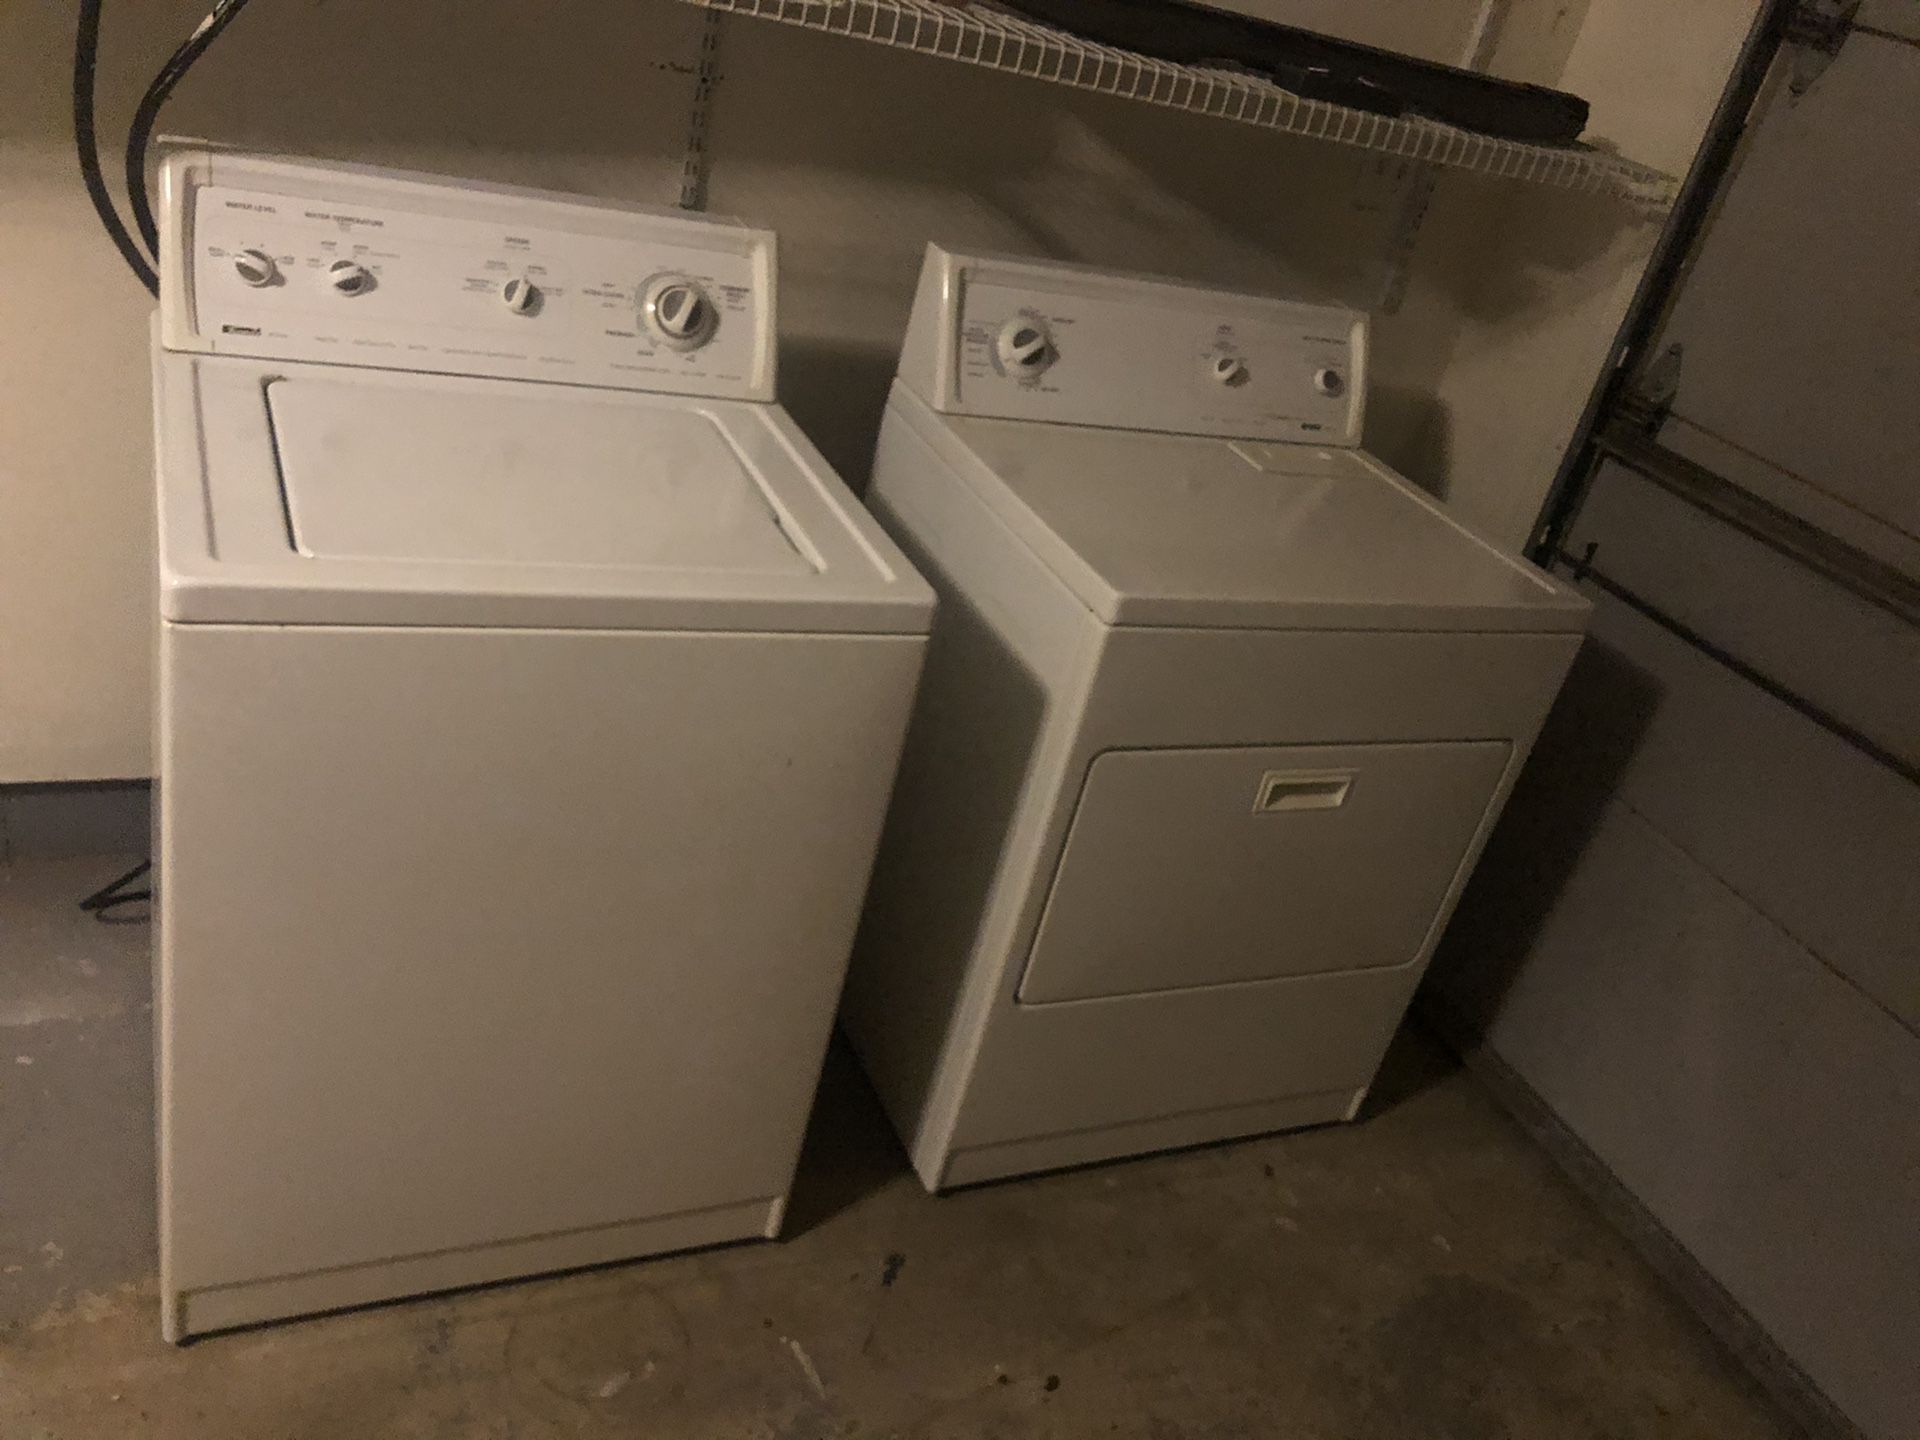 Kenmore 80 series washer and dryer